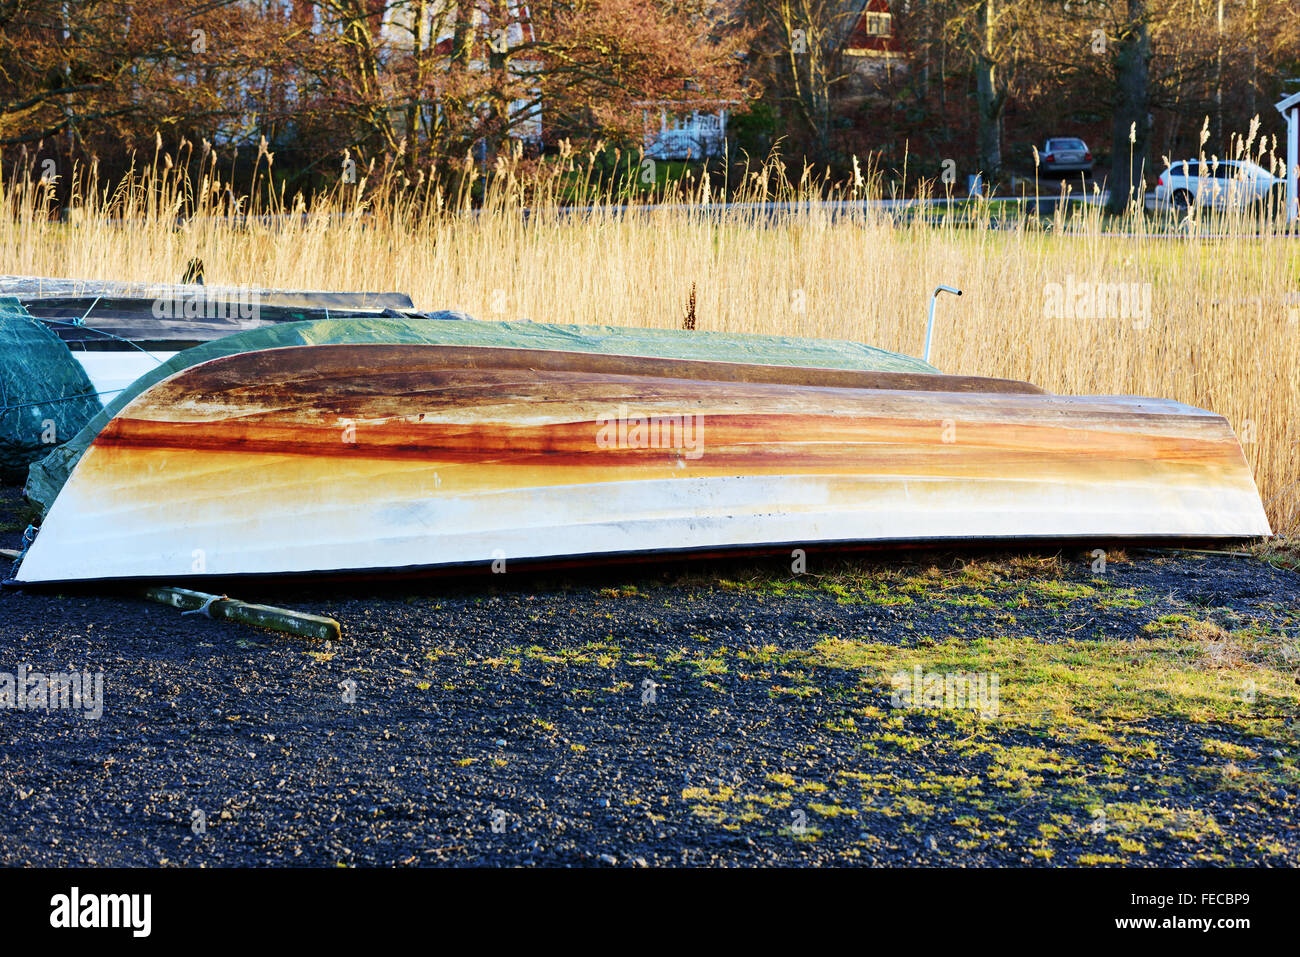 One plastic boat turned upside down on land during winter. The keel is very discolored after years of use. Reeds in background. Stock Photo